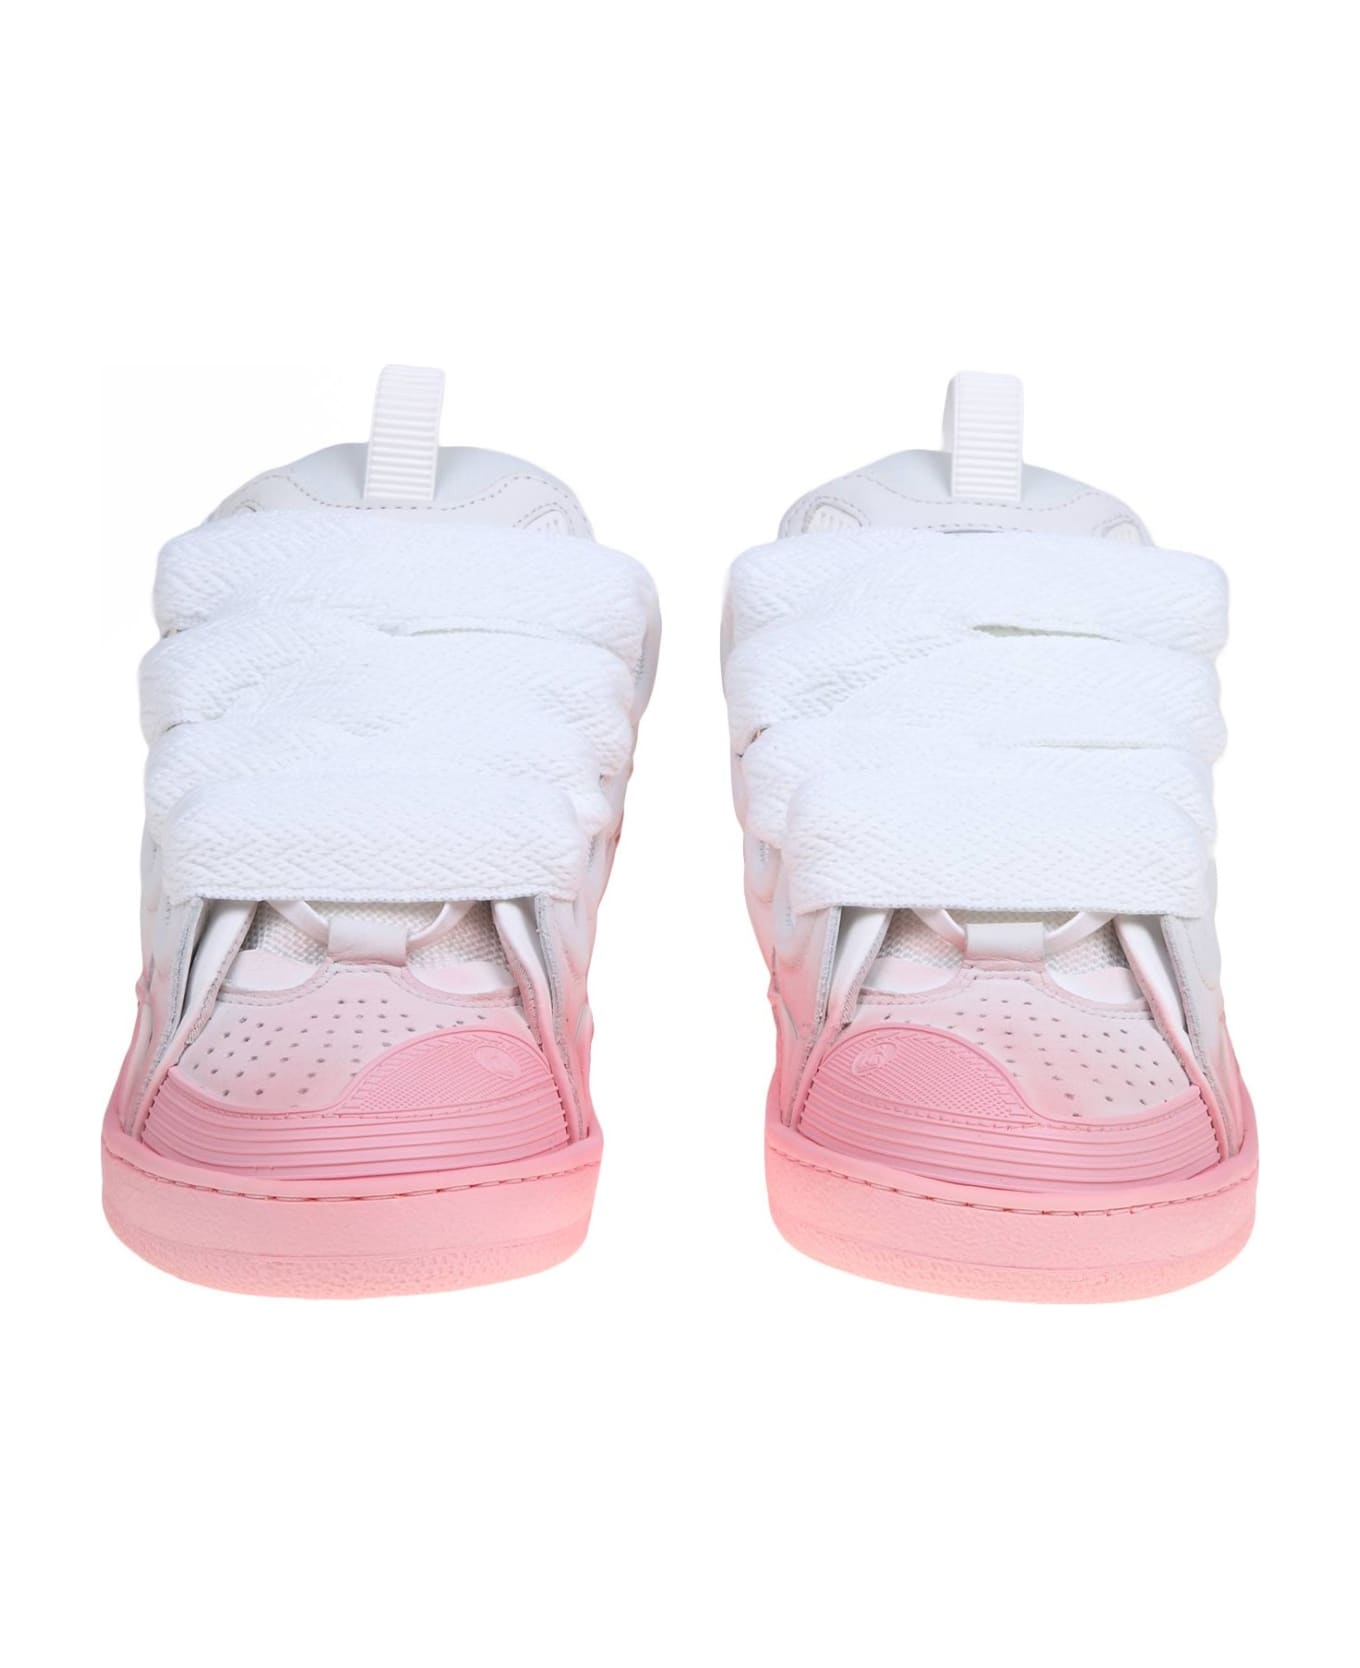 Lanvin Curb Sneakers In White And Pink Leather - Pink スニーカー